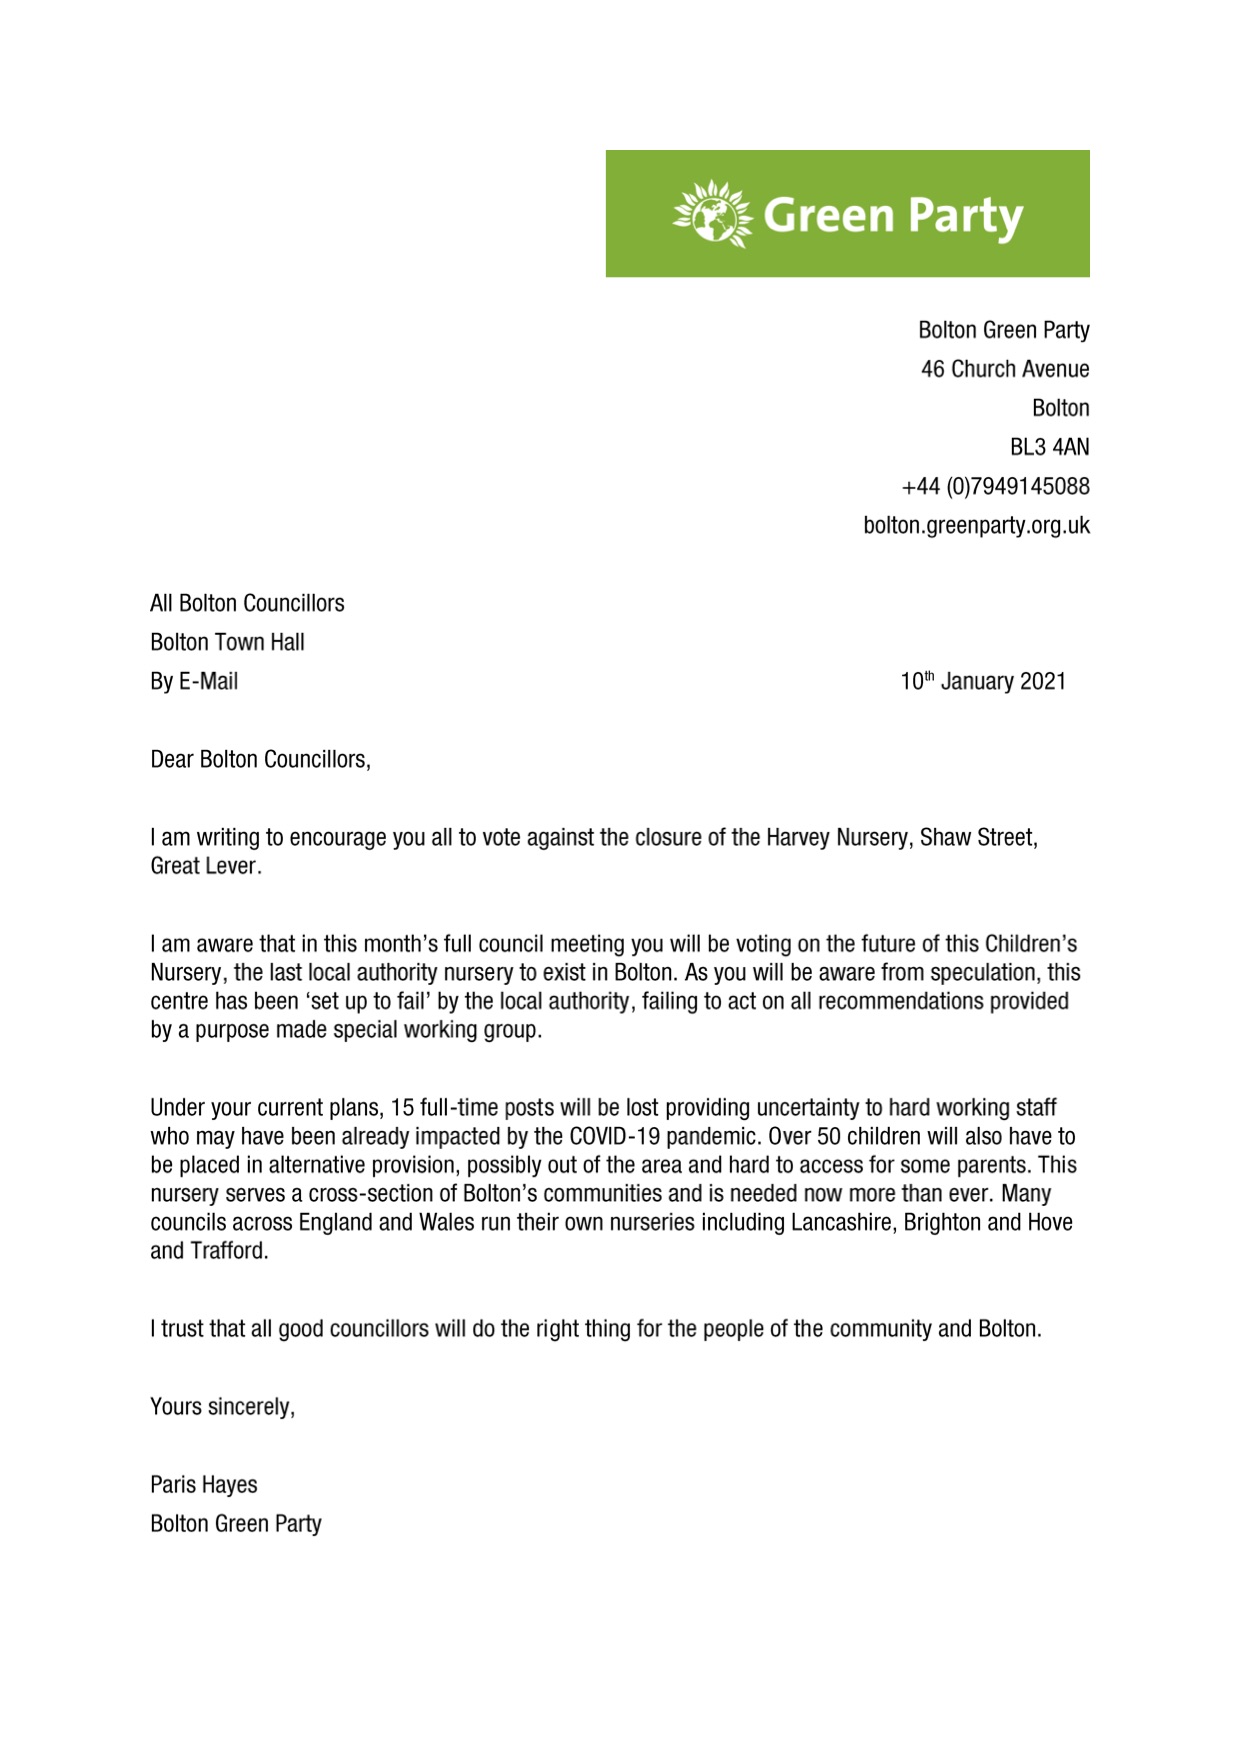 Letter to Councillors